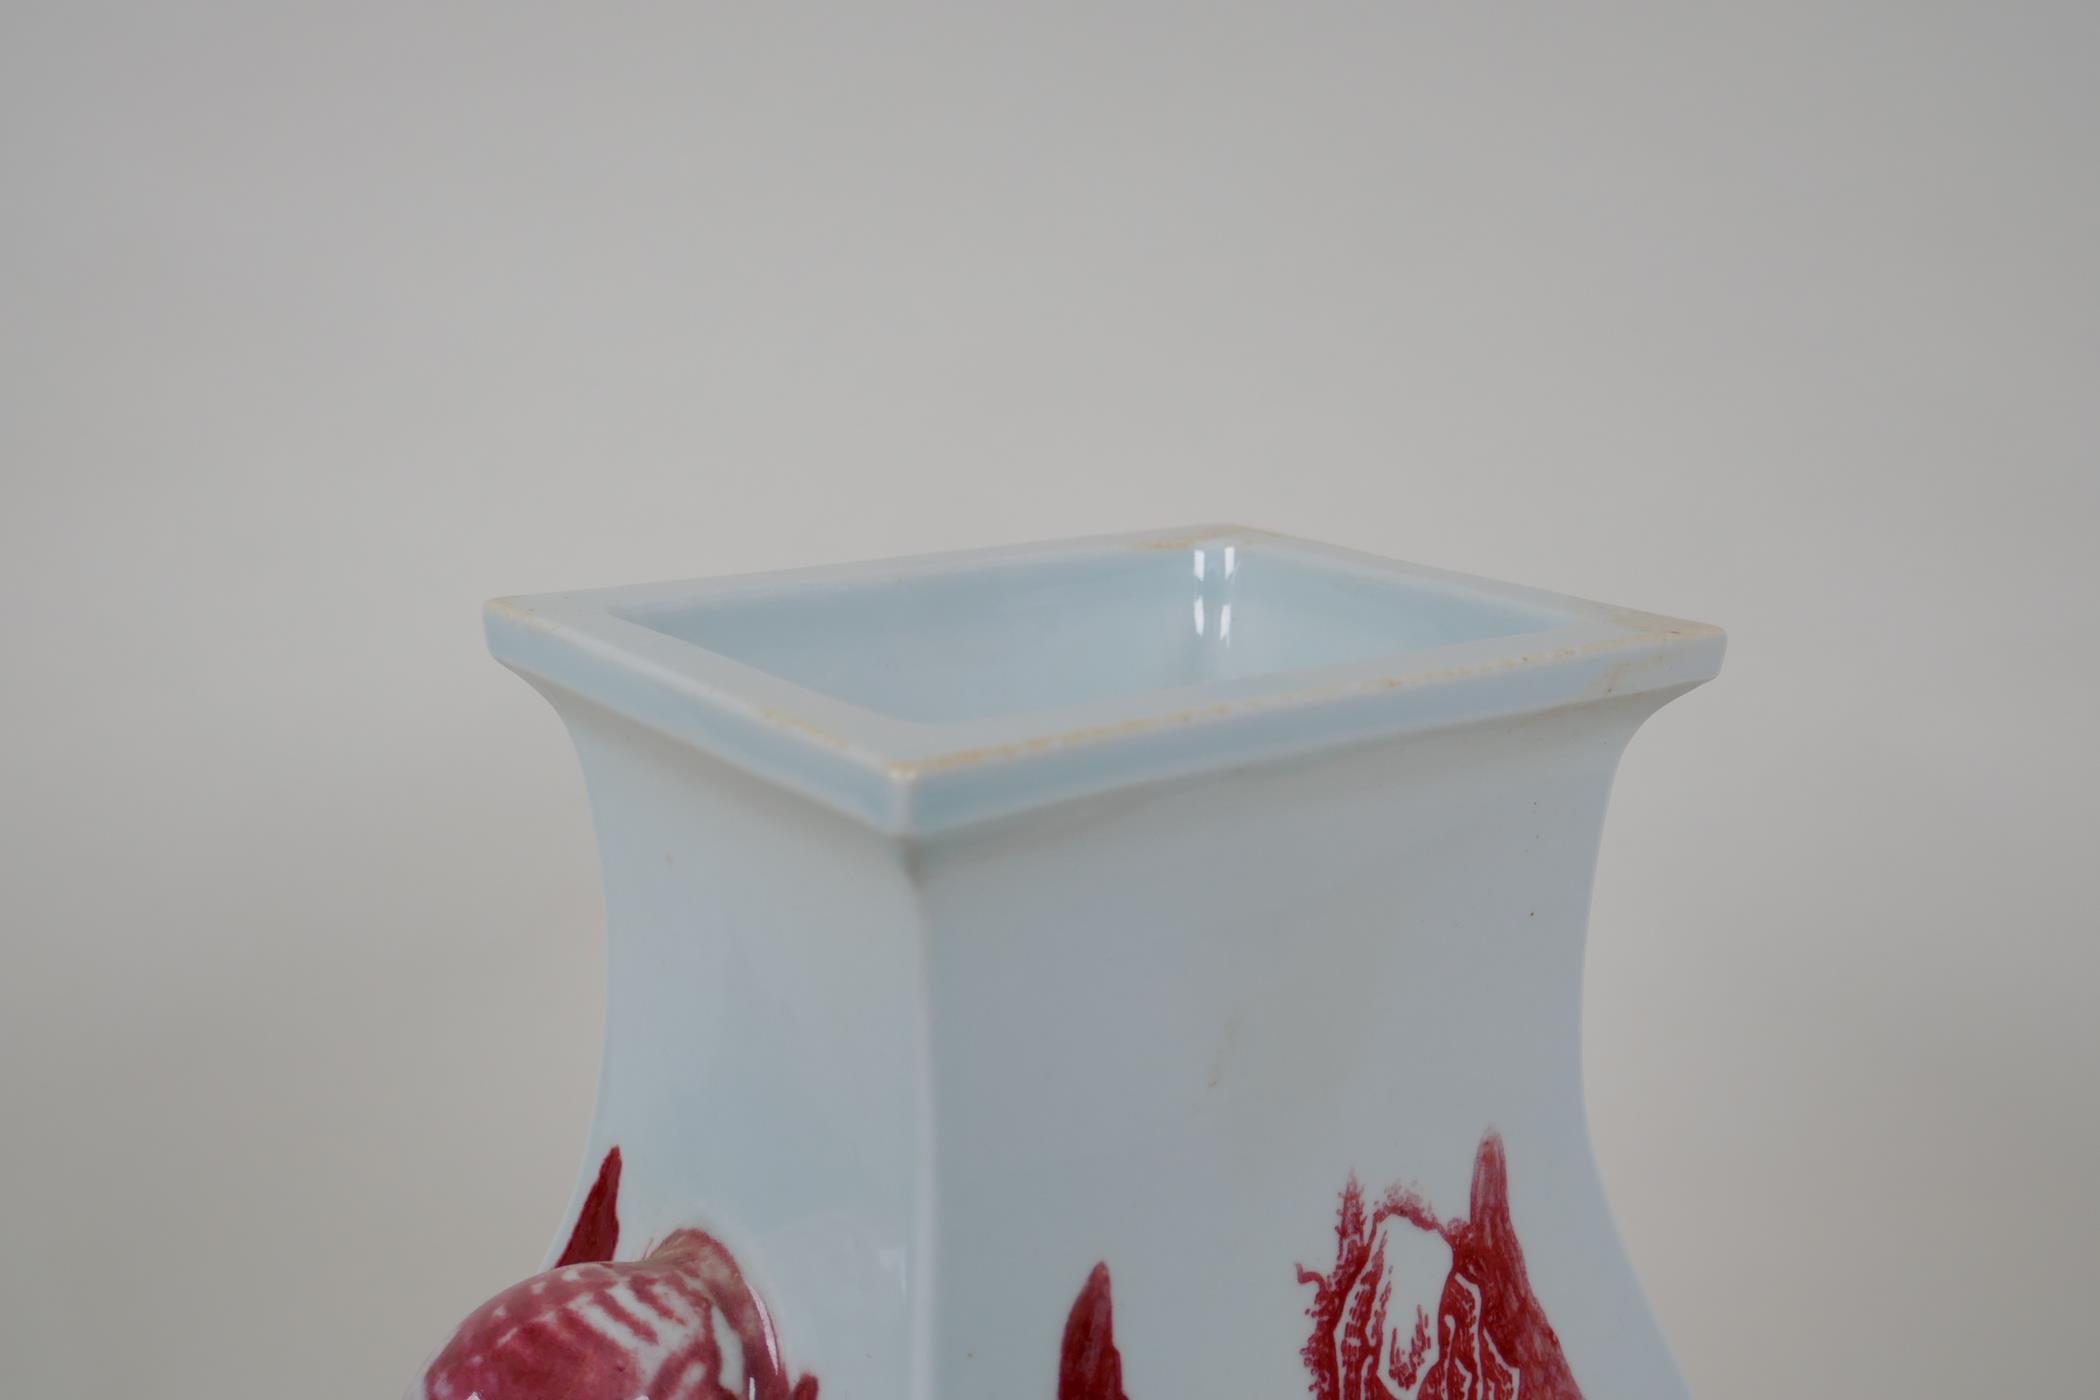 A red and white porcelain vase with two elephant mask handles, decorated with mountain landscape - Image 4 of 8